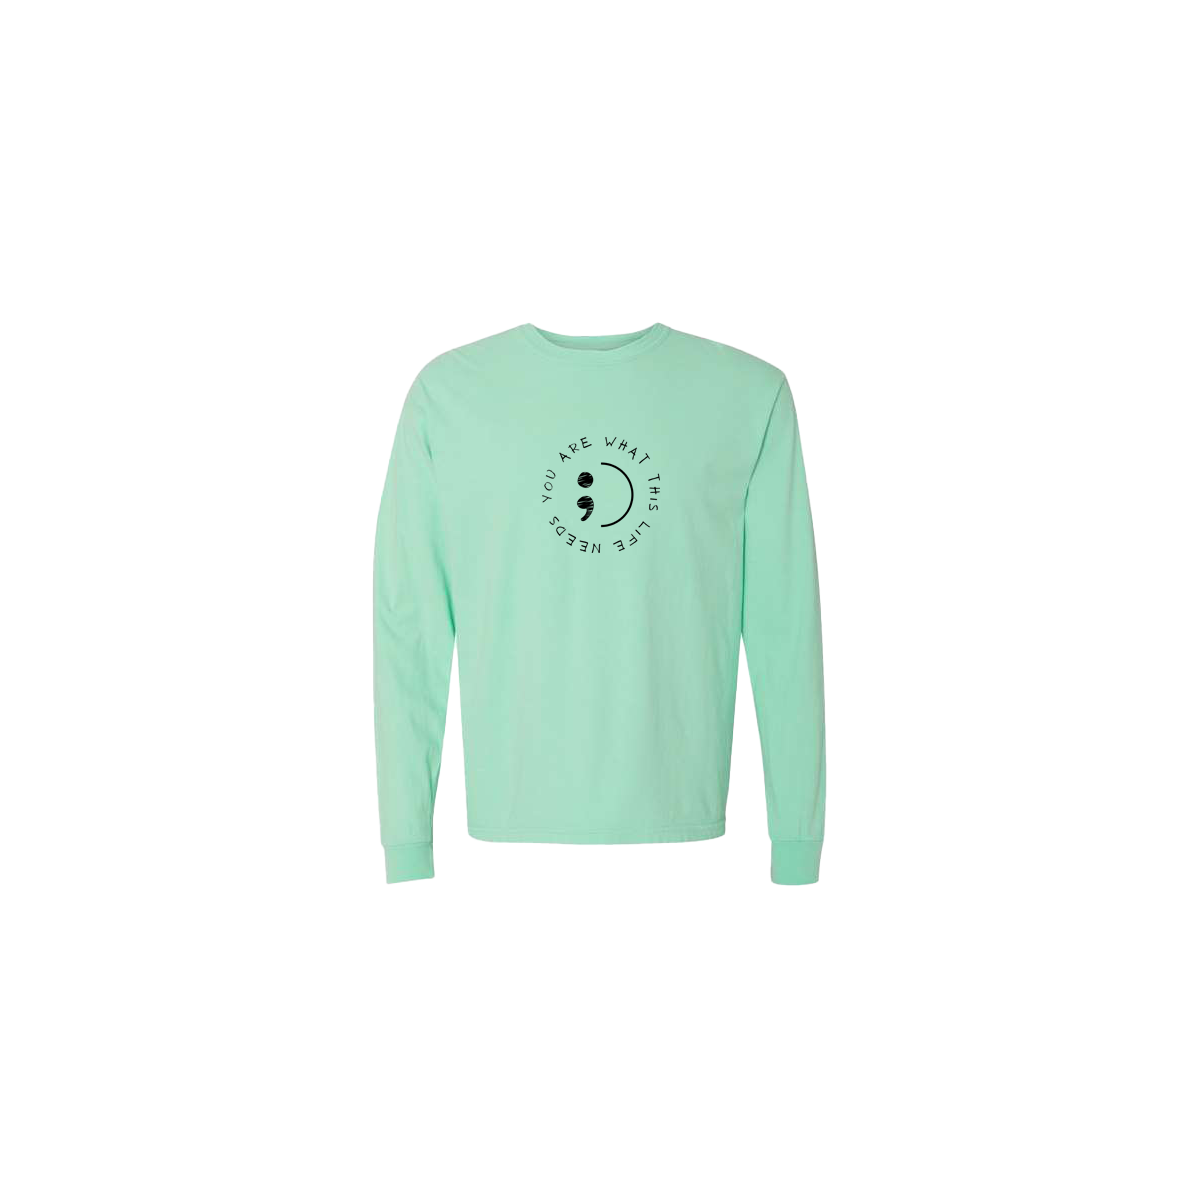 You Are What This Life Needs Embroidered Mint Long Sleeve Tshirt - Mental Health Awareness Clothing